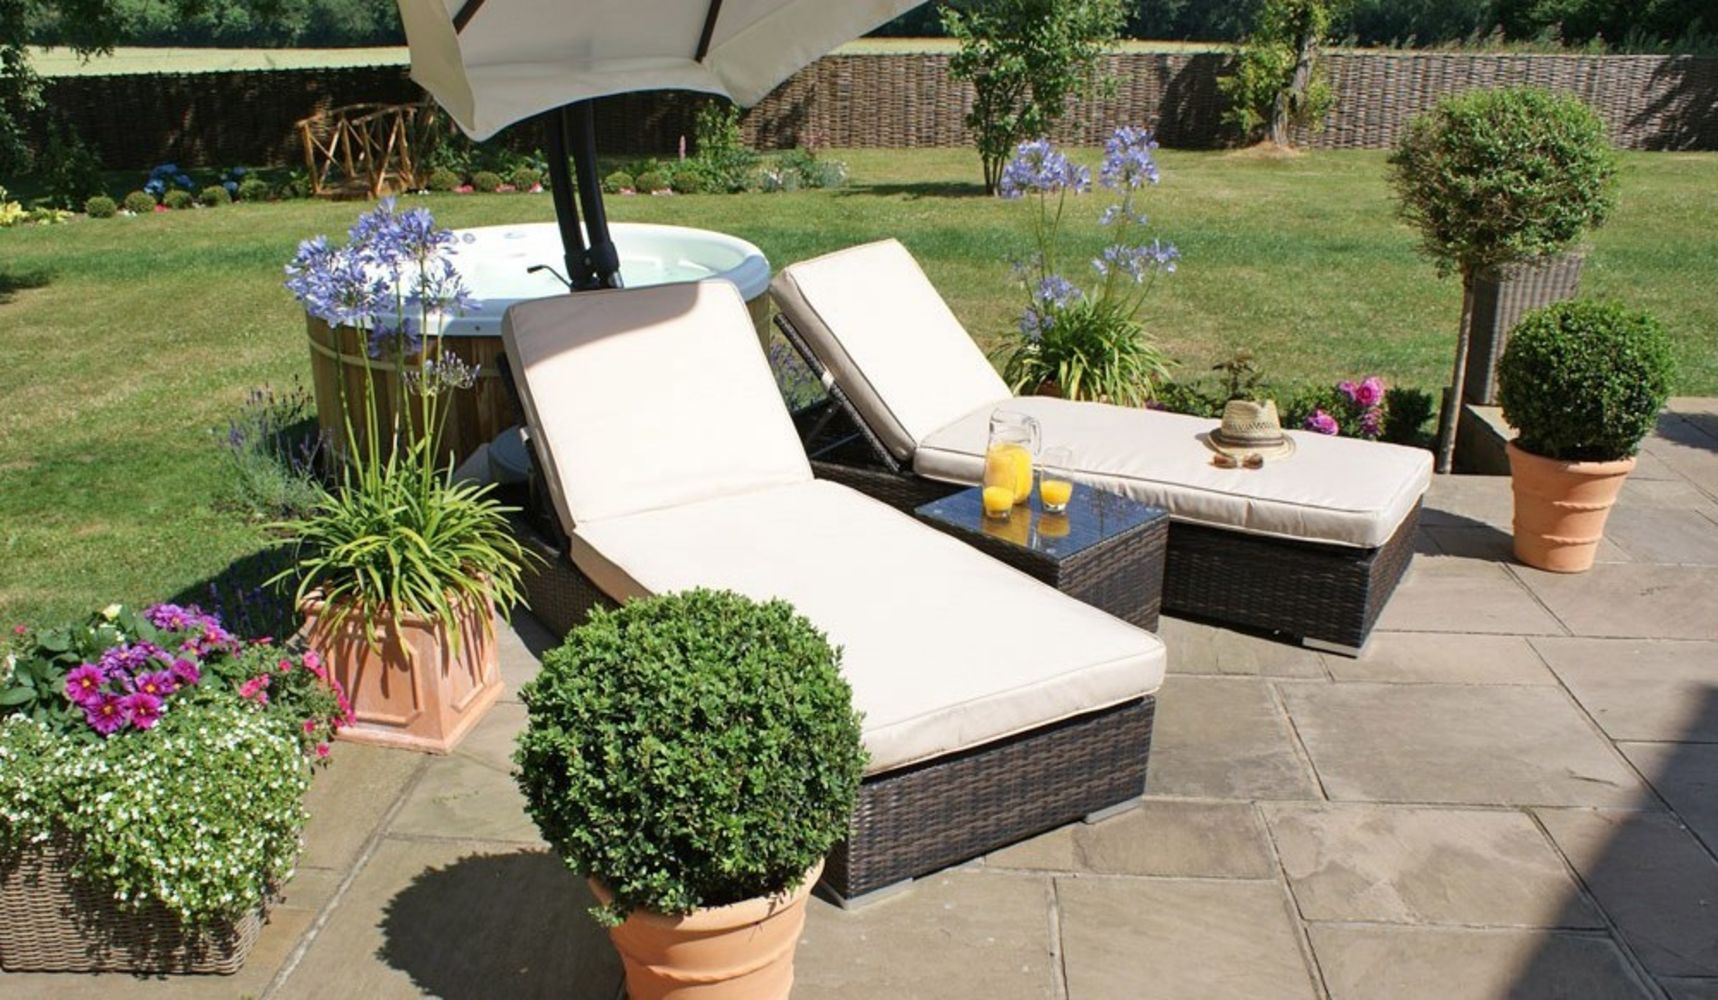 "The Chelsea Garden Company" Rattan Garden Furniture Clearance: Dining Sets, Loungers and Cooler Tables